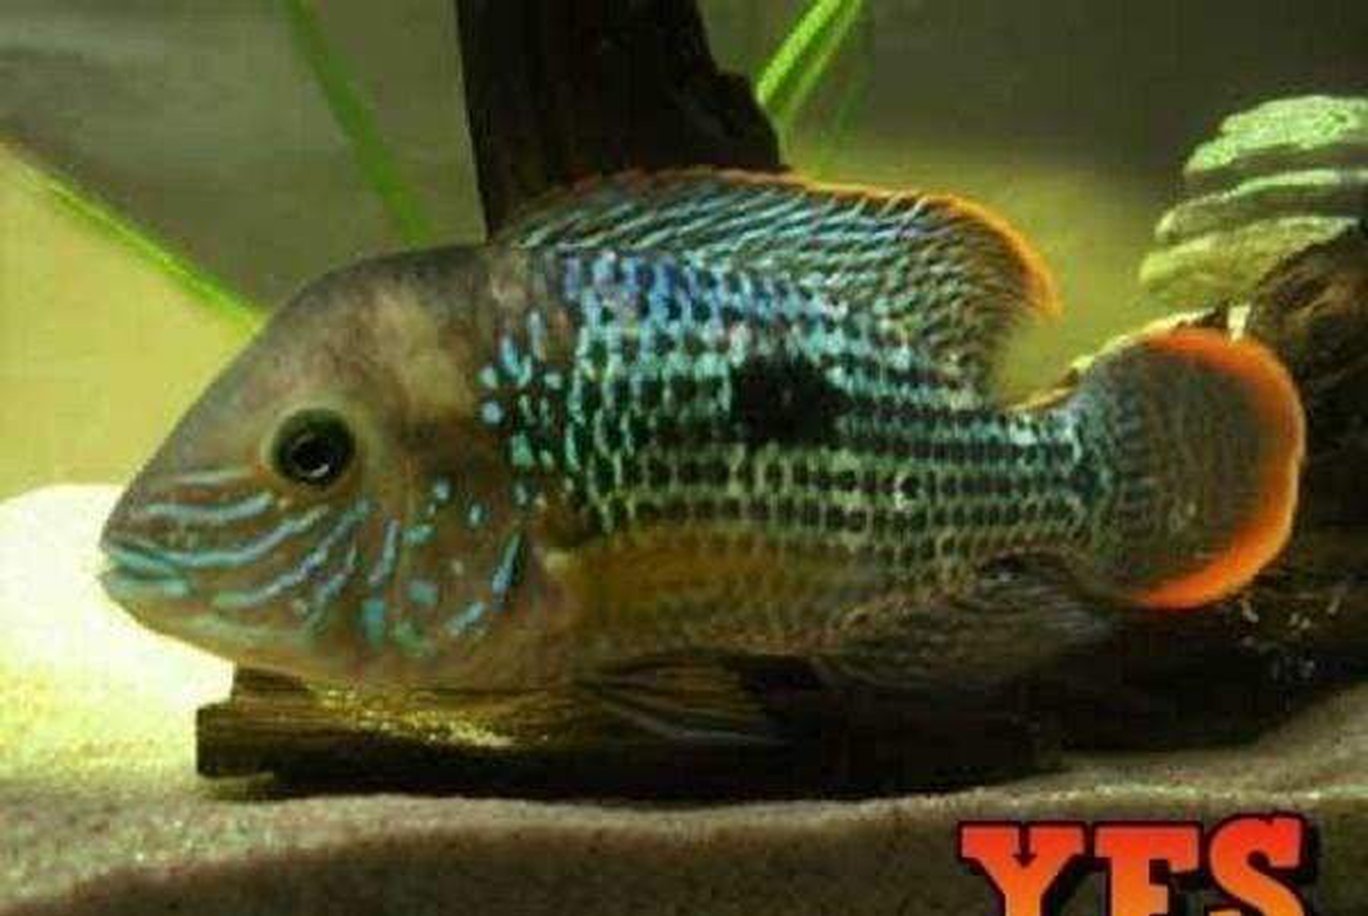 X10 Green Terror Cichlids Sml/Med 1" - 2" Each Freshwater Fish-Freshwater Fish Package-www.YourFishStore.com